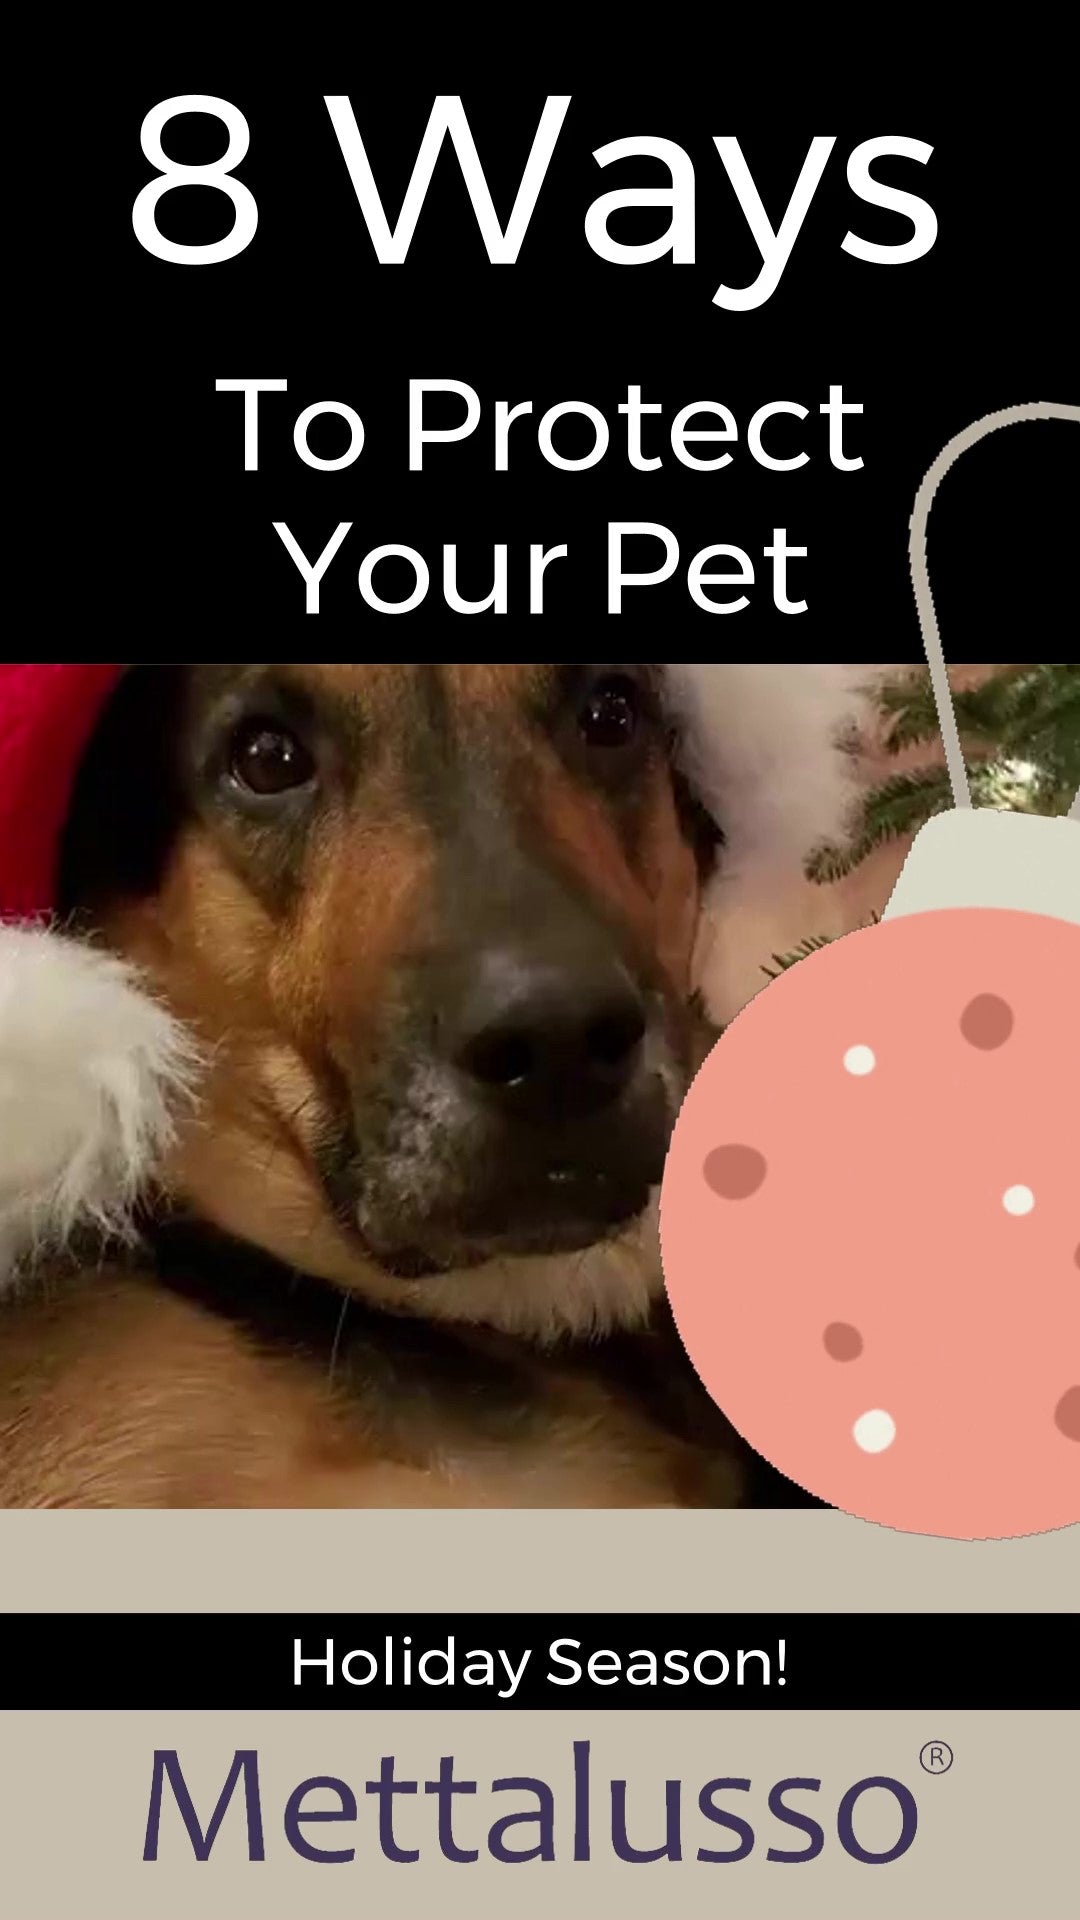 Mettalusso gives eight great holiday safety tips for your pets